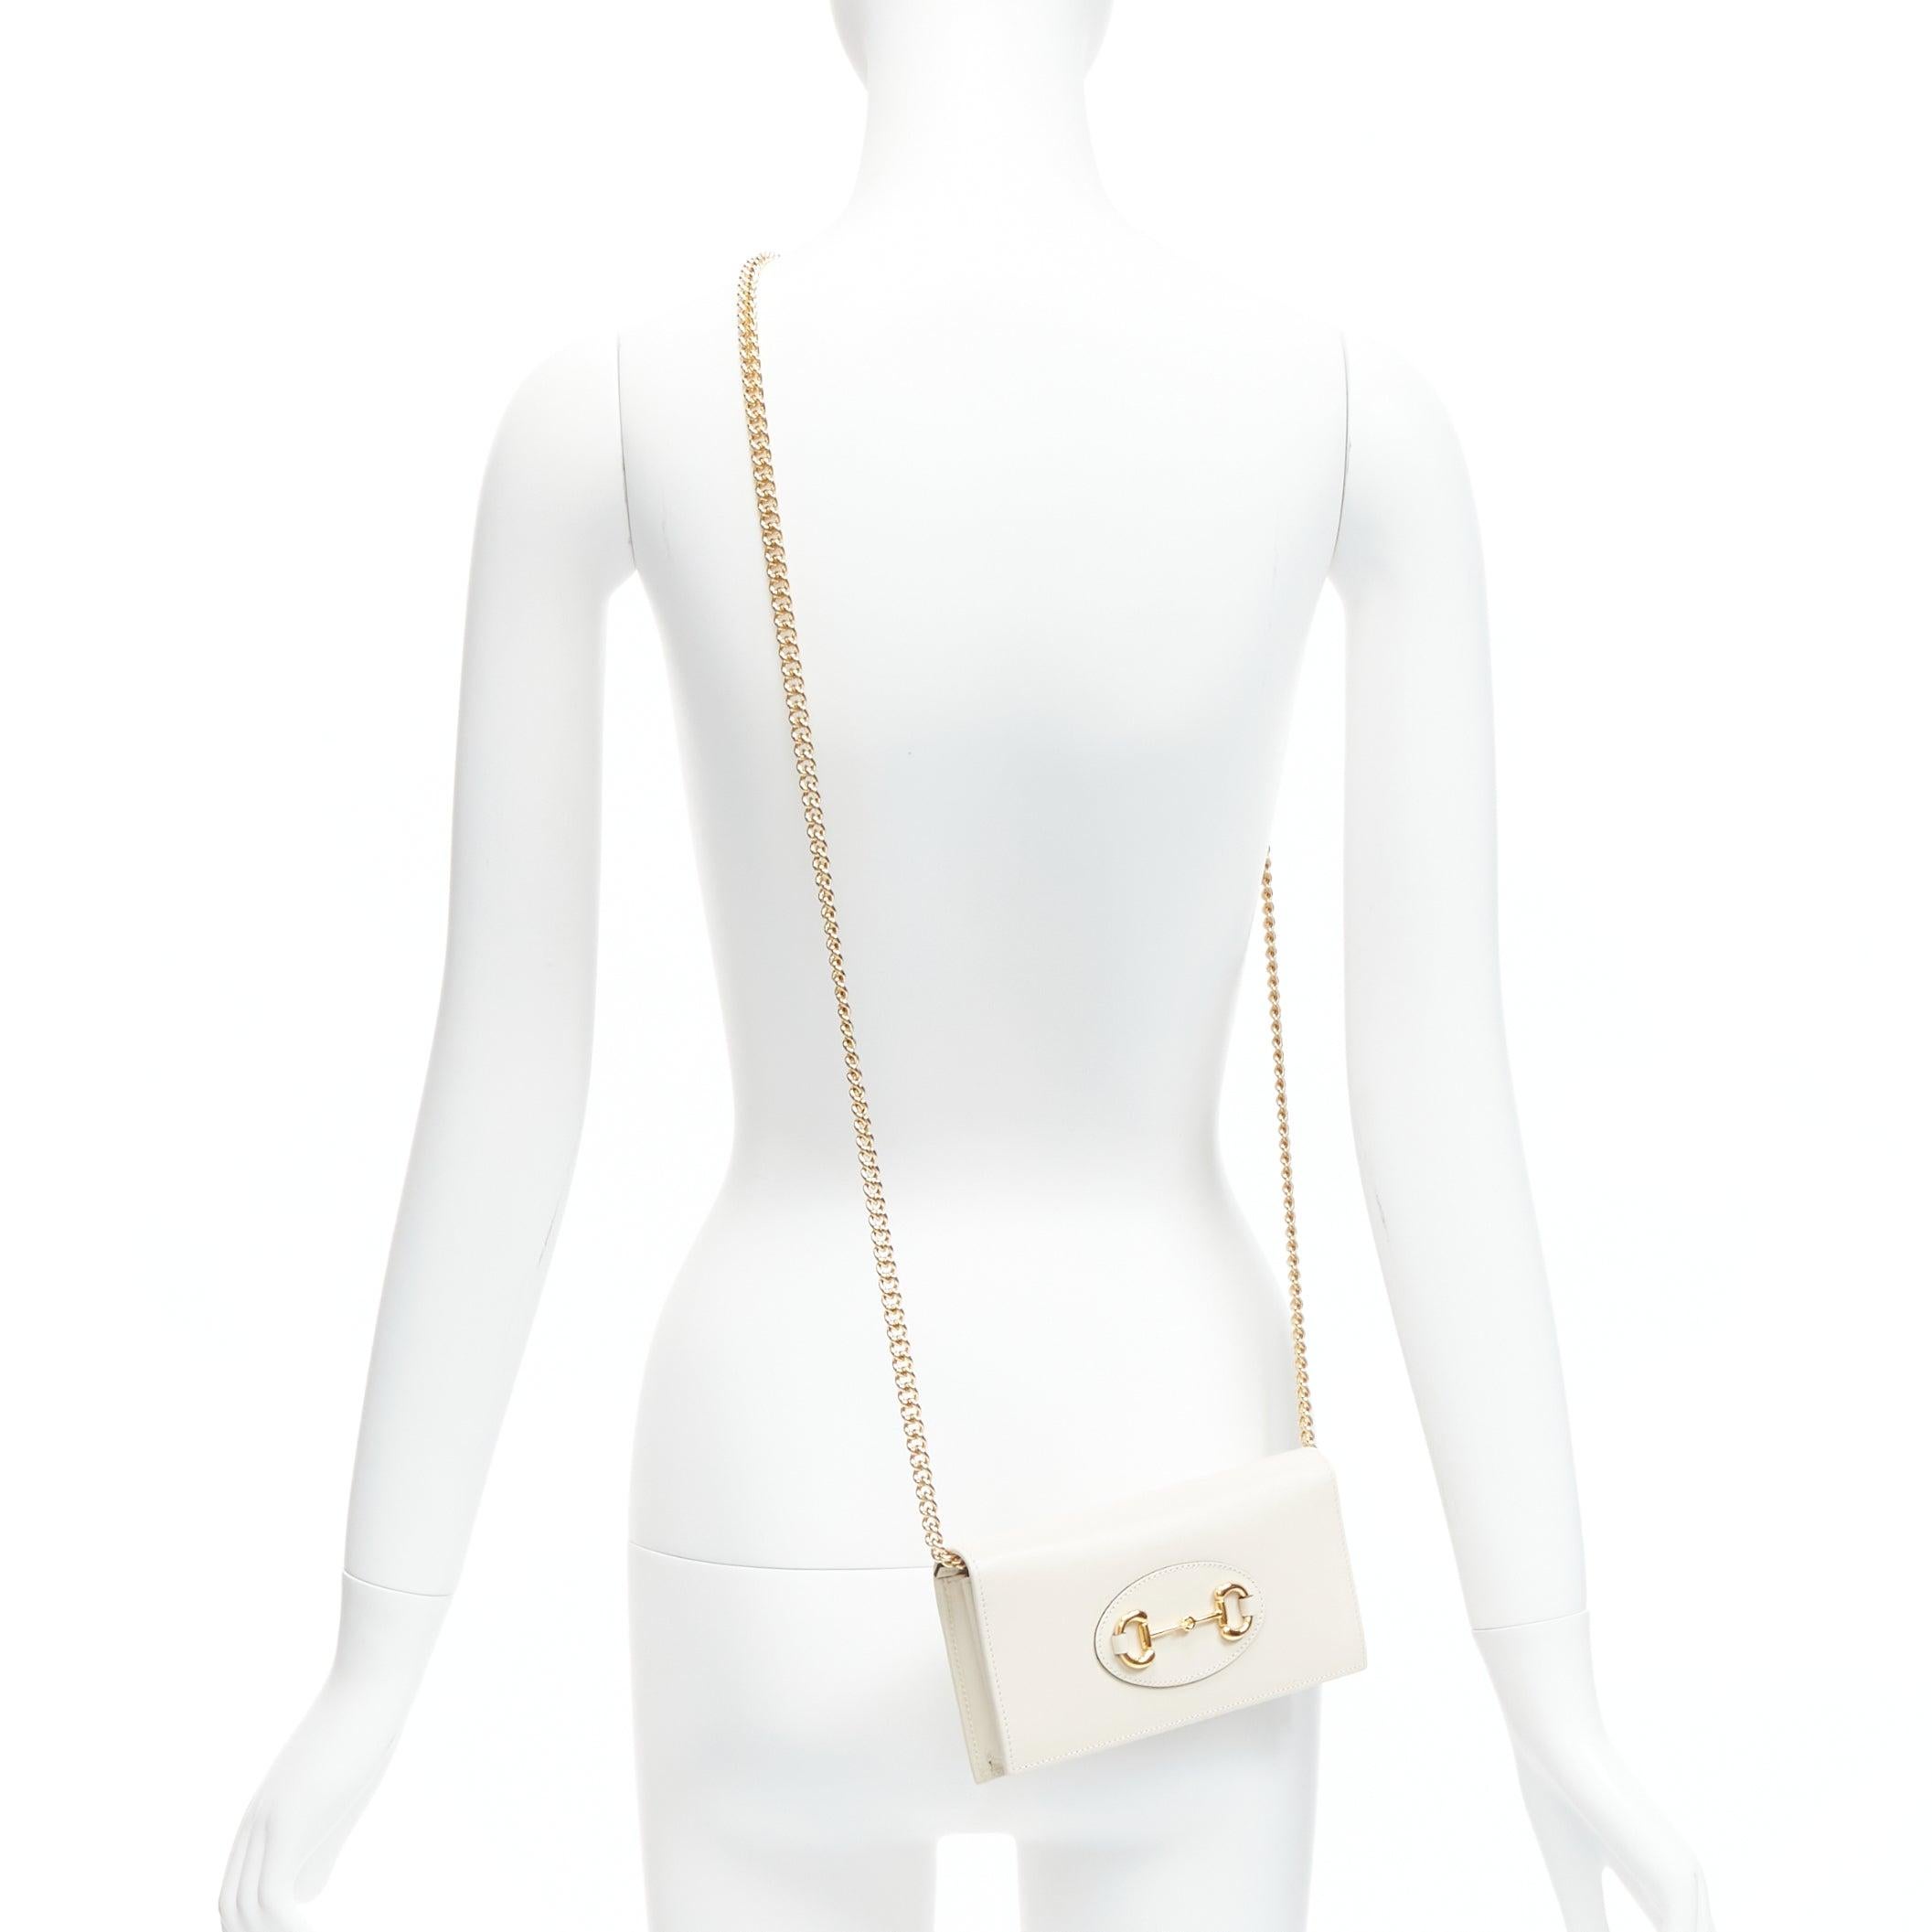 GUCCI 1995 Horsebit white gold buckles detail crossbody clutch WOC wallet
Reference: LNKO/A02152
Brand: Gucci
Designer: Alessandro Michele
Model: 1995 Horsebit
Material: Leather, Metal
Color: White
Pattern: Solid
Closure: Snap Buttons
Lining: Brown